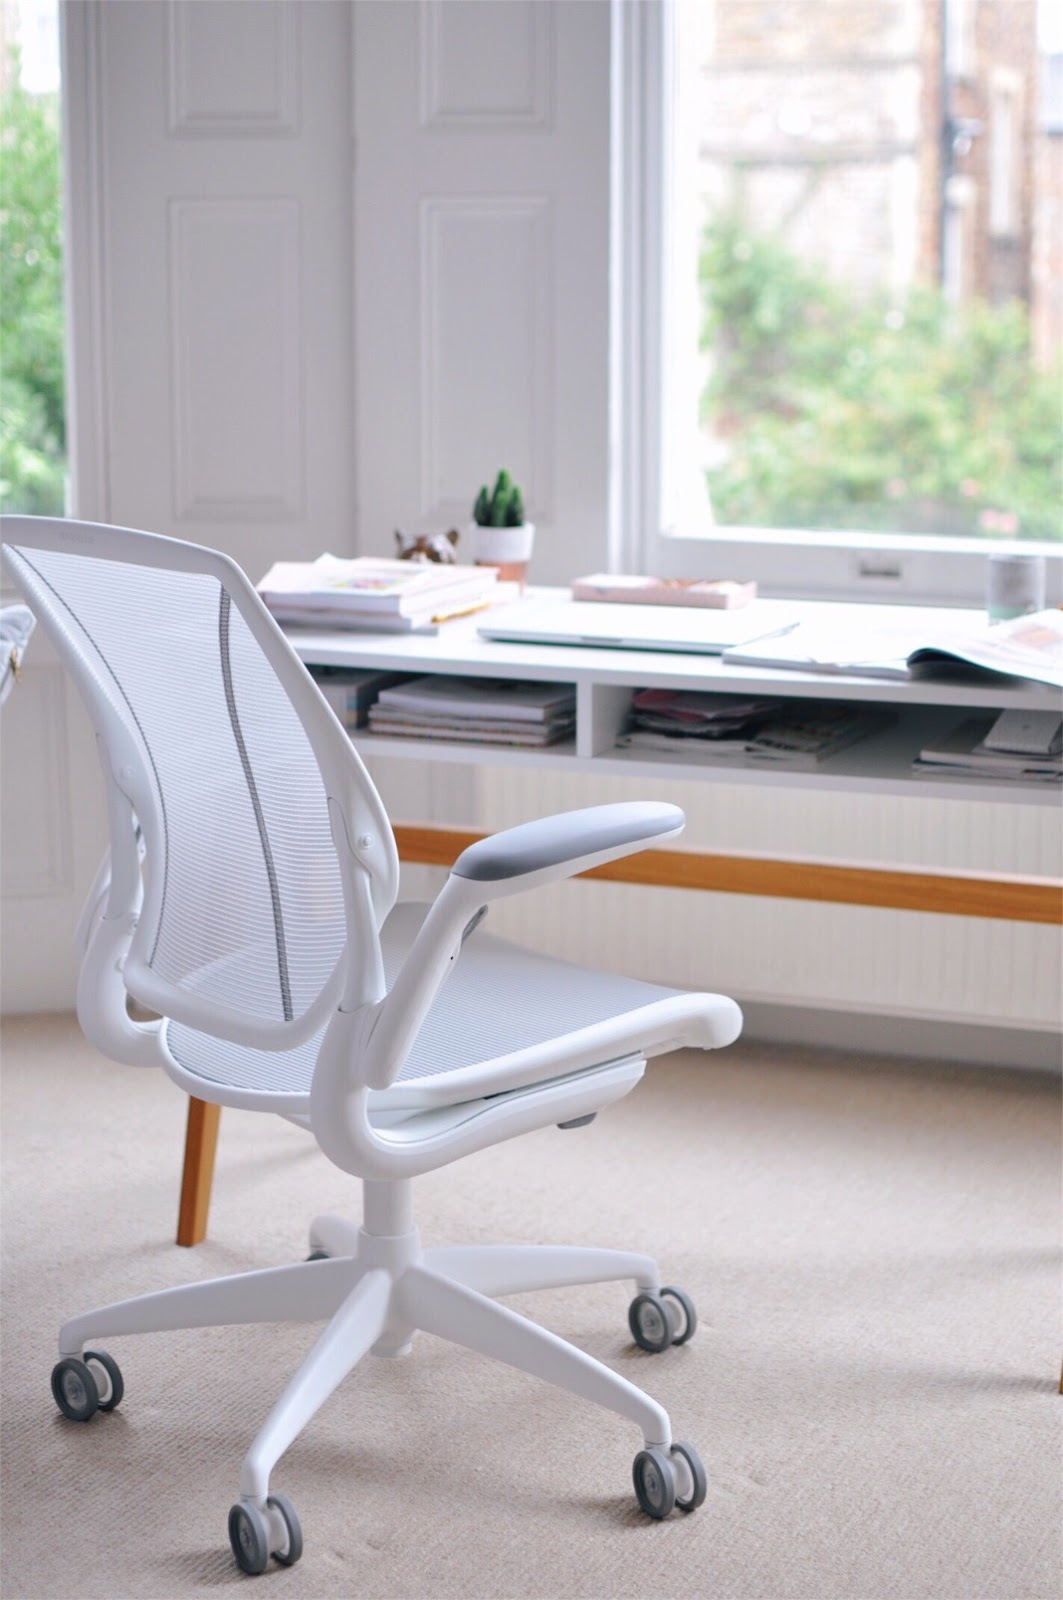 home office ideas, office design, office decor ideas, working from home, back to work after a baby, office interior, small office desk, best office chair, computer chair, white office chair white desk chair, working with a baby